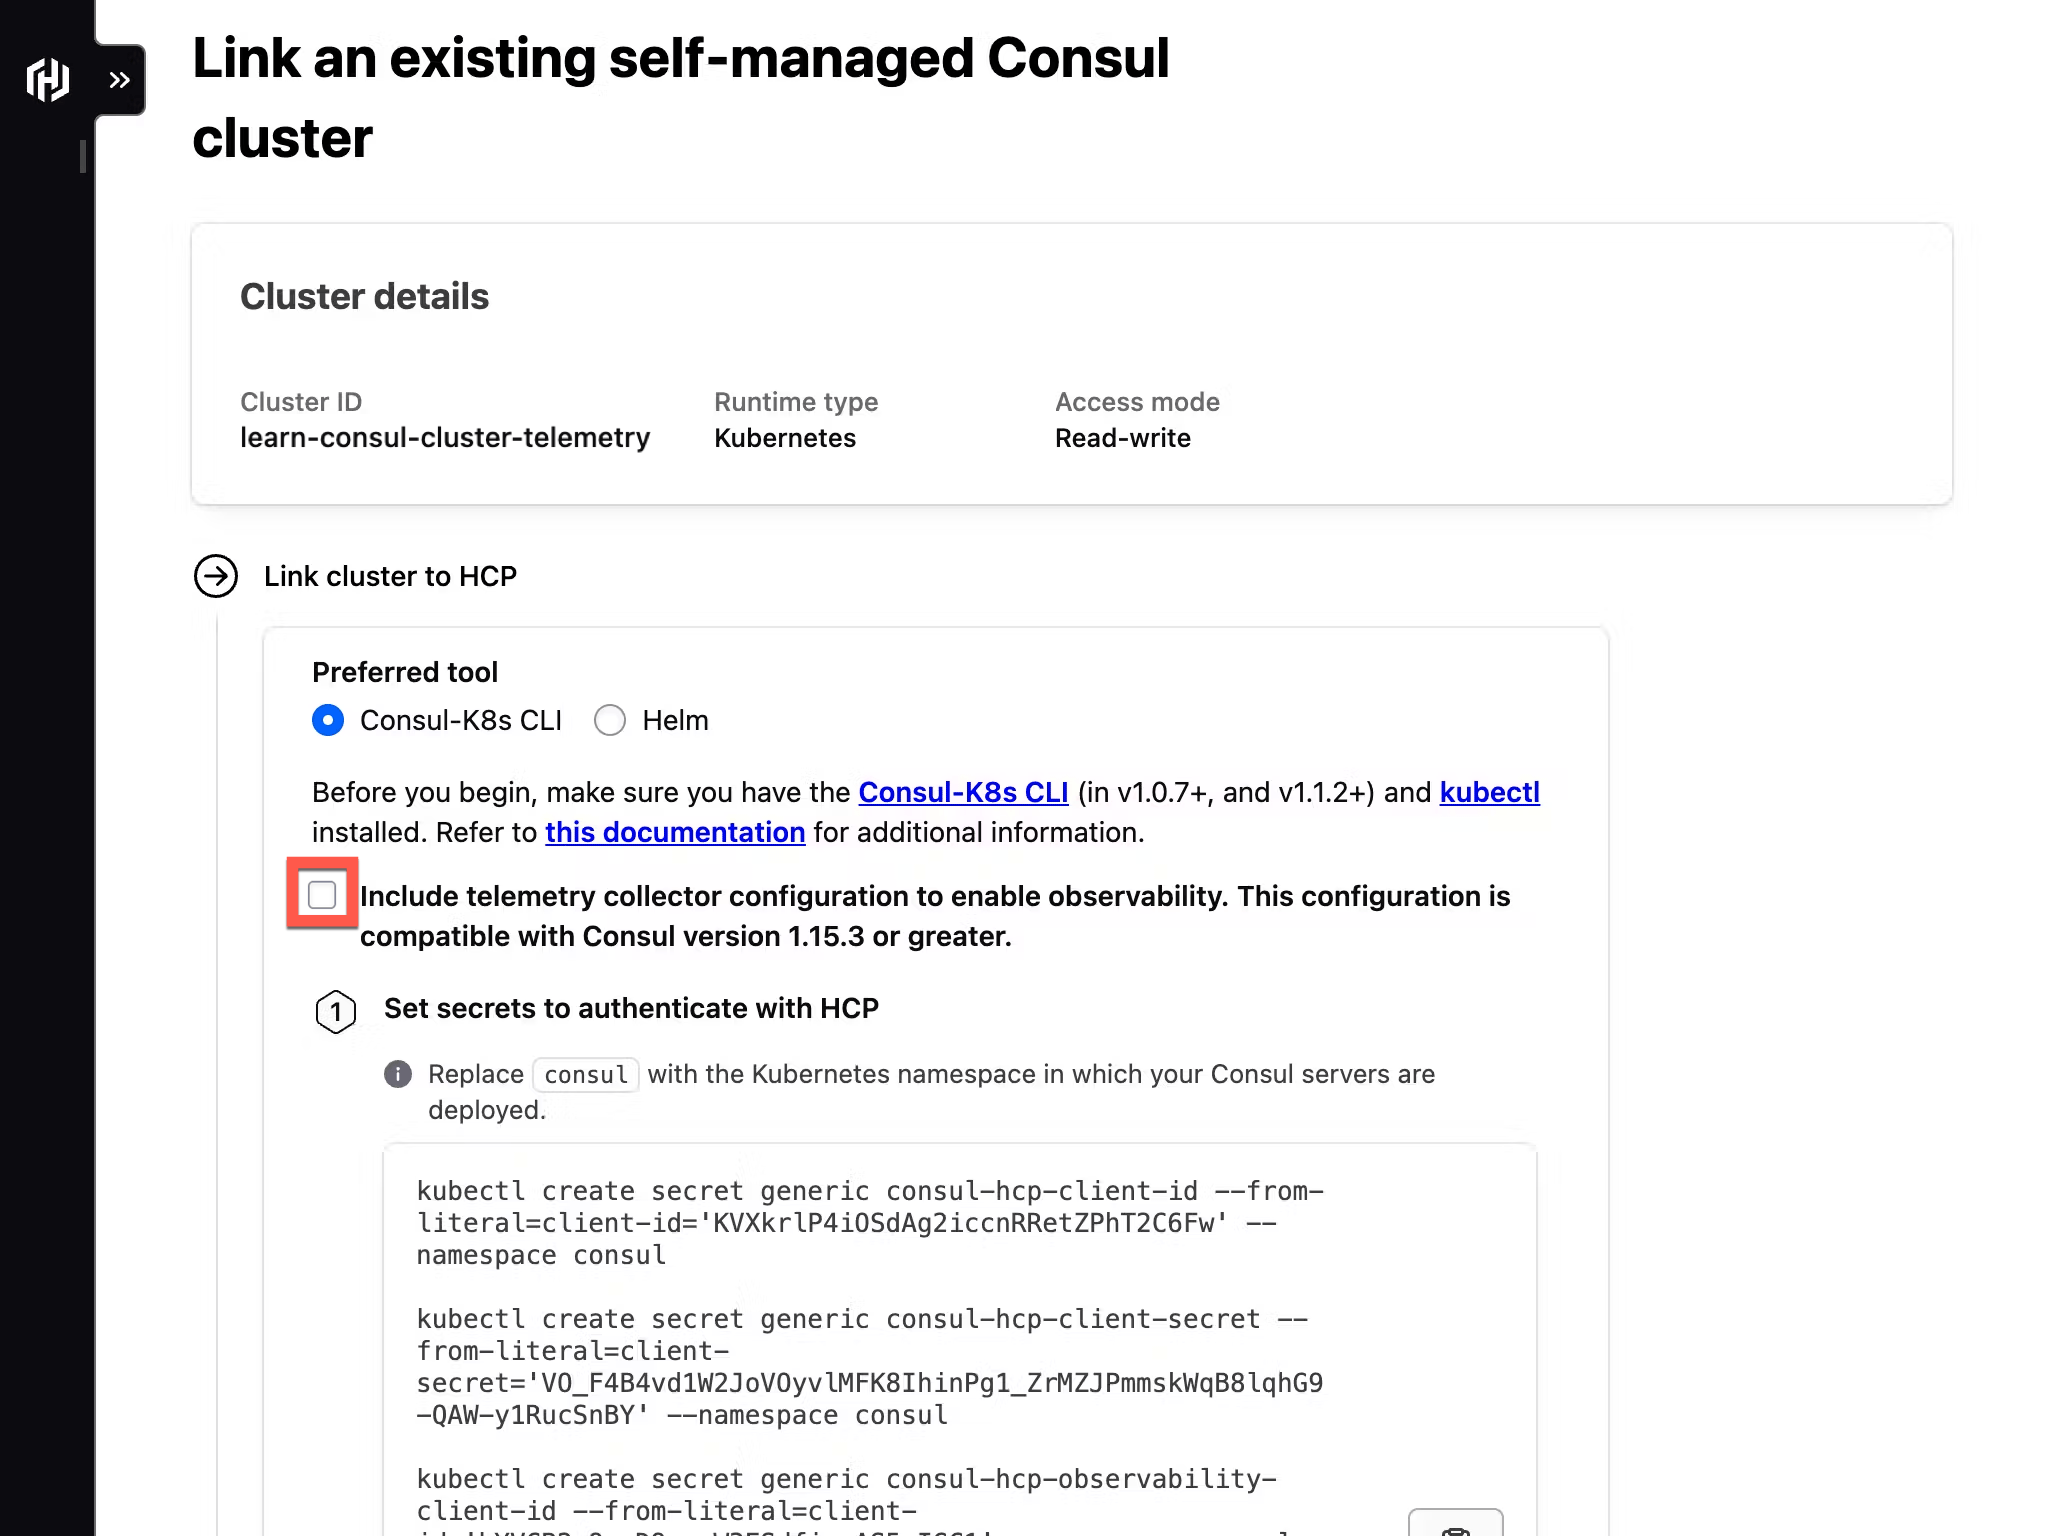 The link cluster to HCP portion of the link an existing self-managed Consul cluster page.